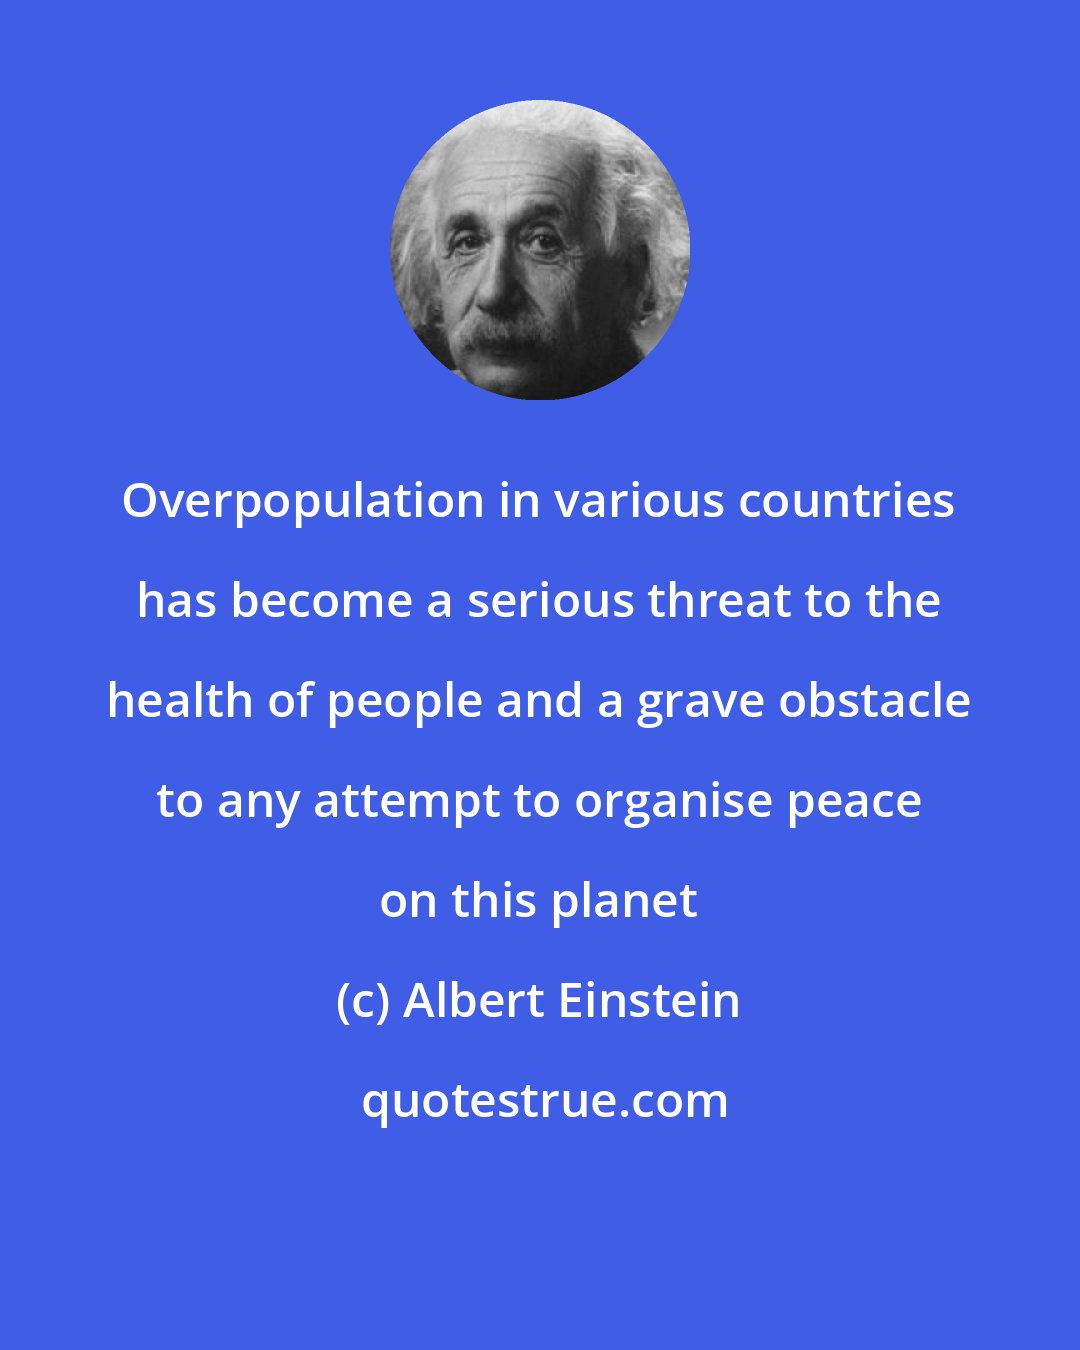 Albert Einstein: Overpopulation in various countries has become a serious threat to the health of people and a grave obstacle to any attempt to organise peace on this planet